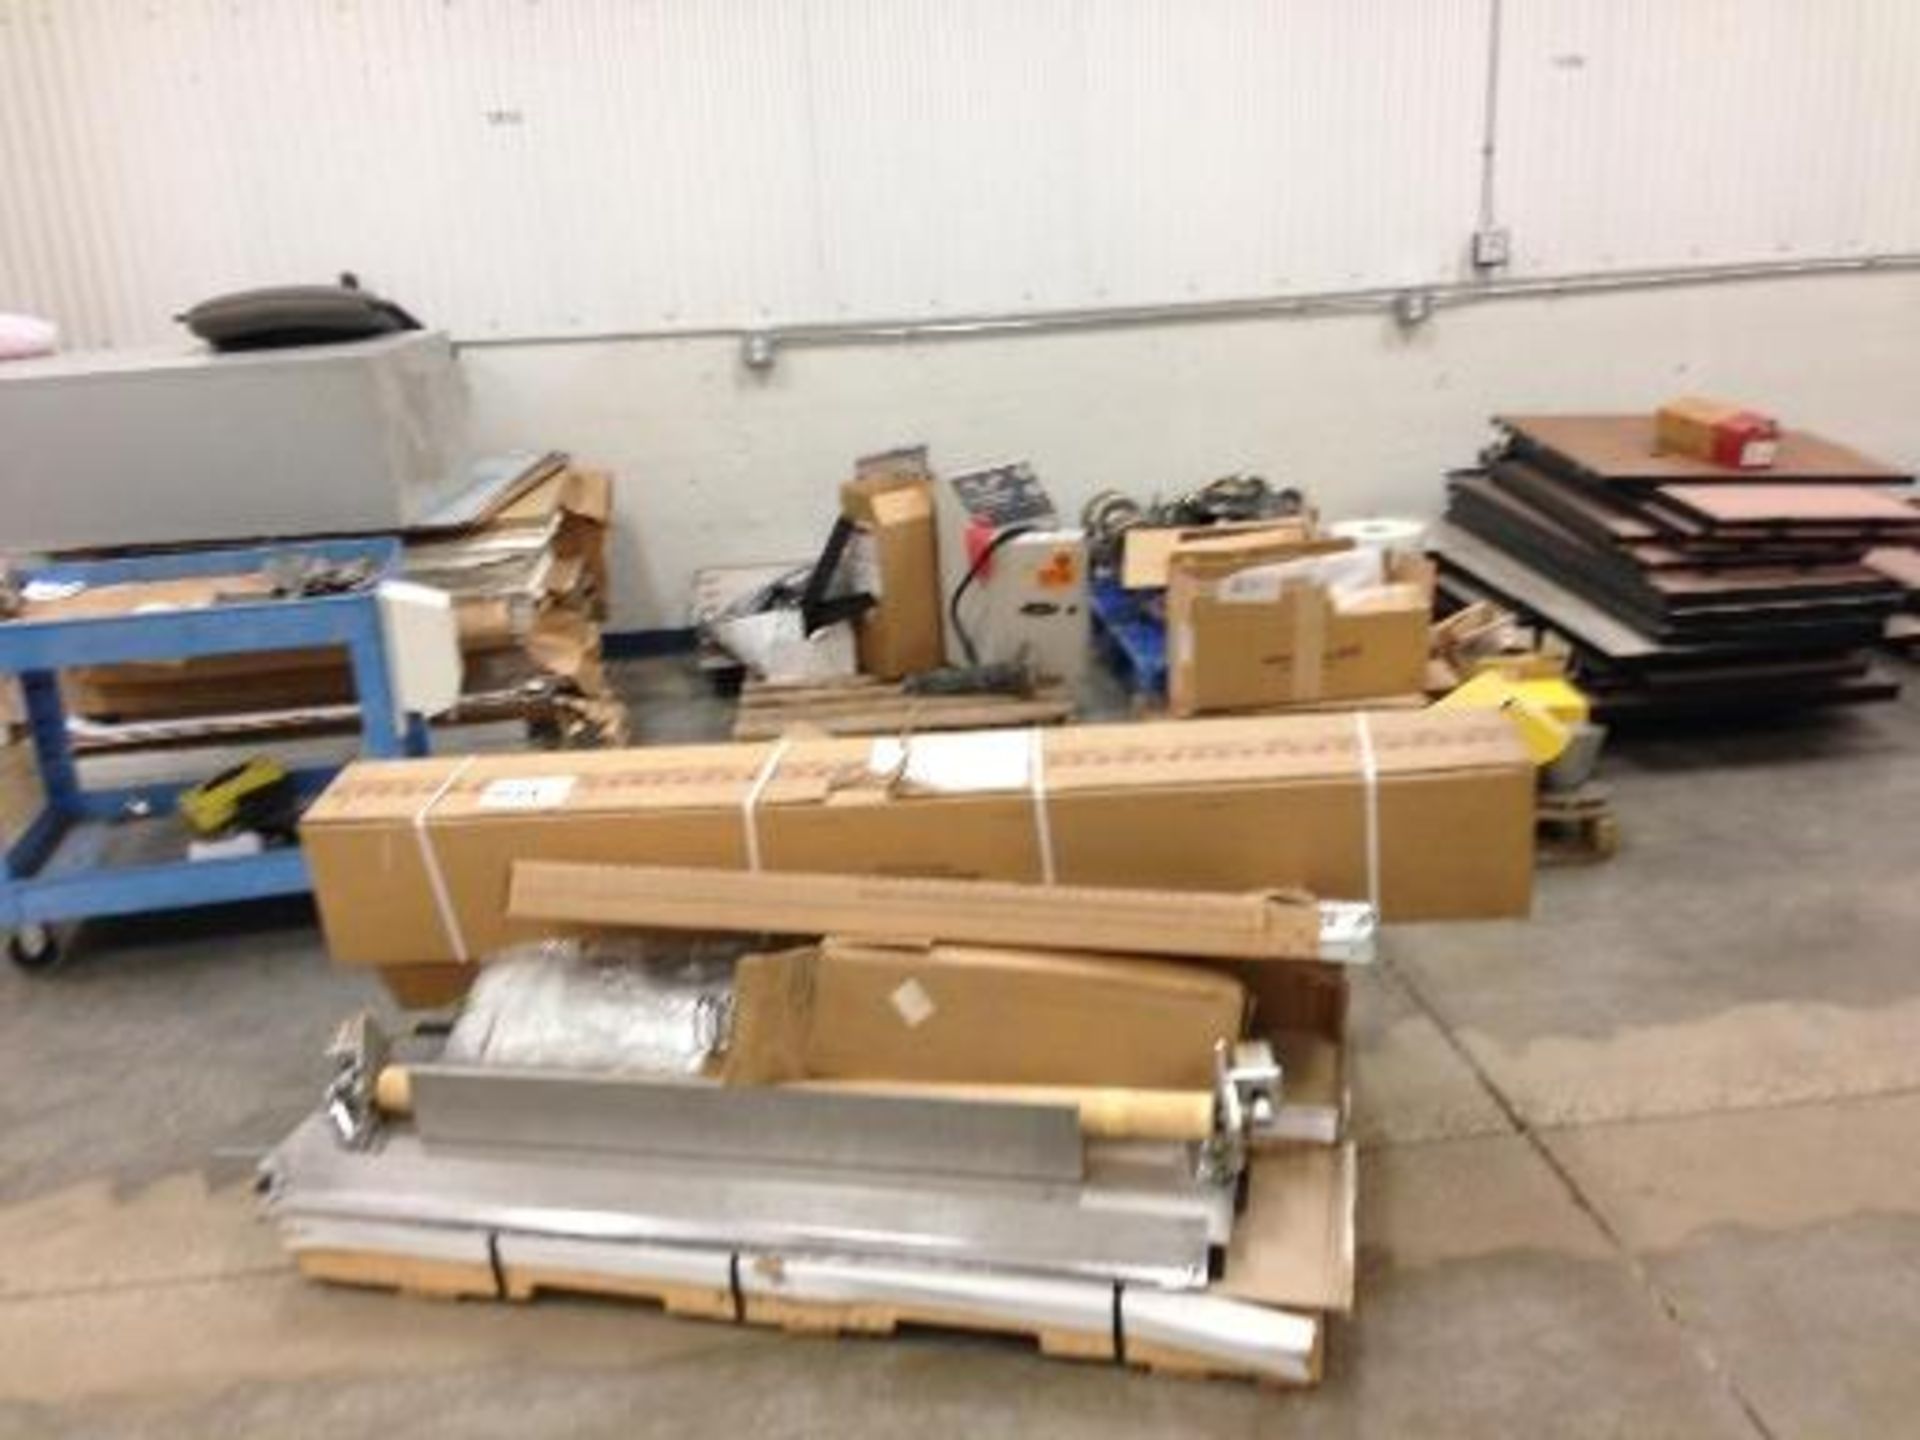 (8) pallets and a cart conveyer parts, heater parts, diaphragm pump parts (LOT) This item located in